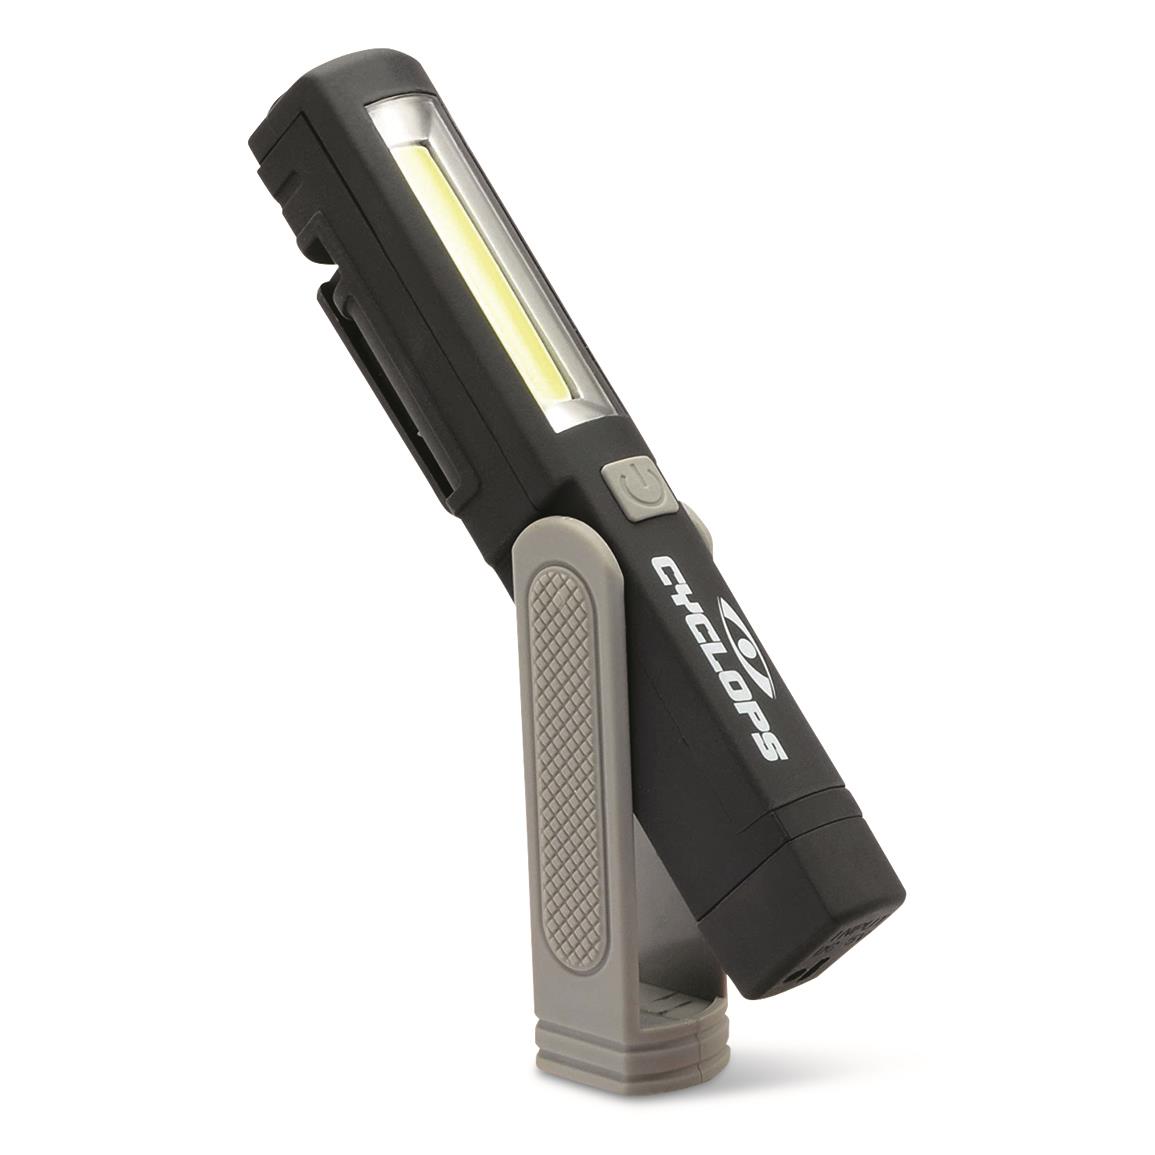 Cyclops Rechargeable 500 Lumen Utility Light with Magnet